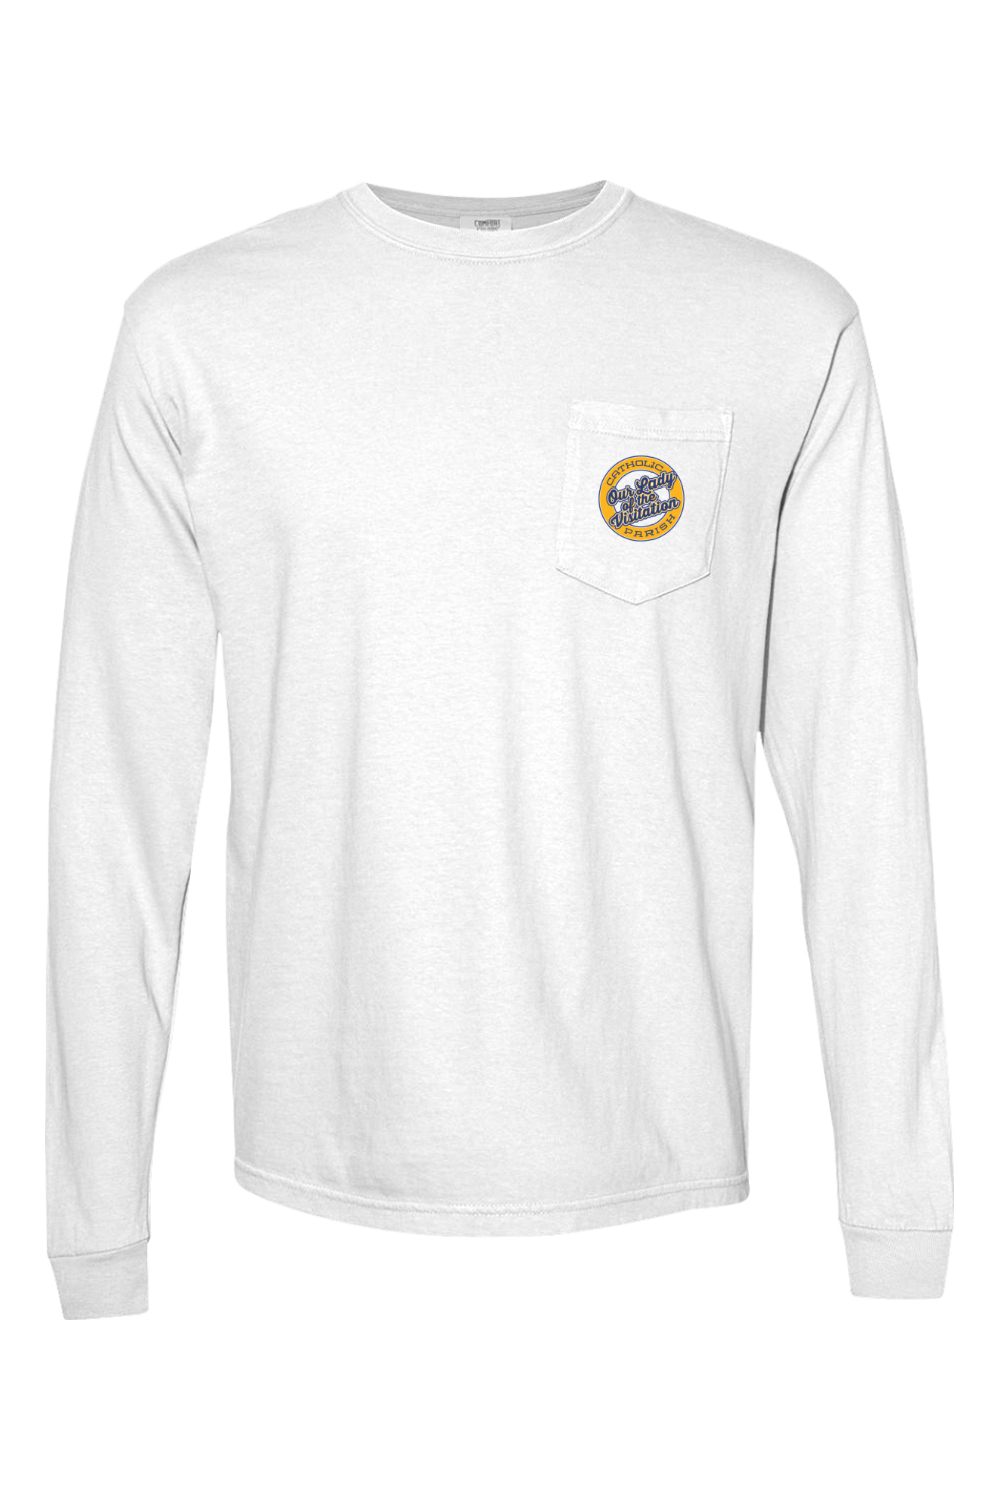 Our Lady of the Visitation Circle Pocket Long Sleeve